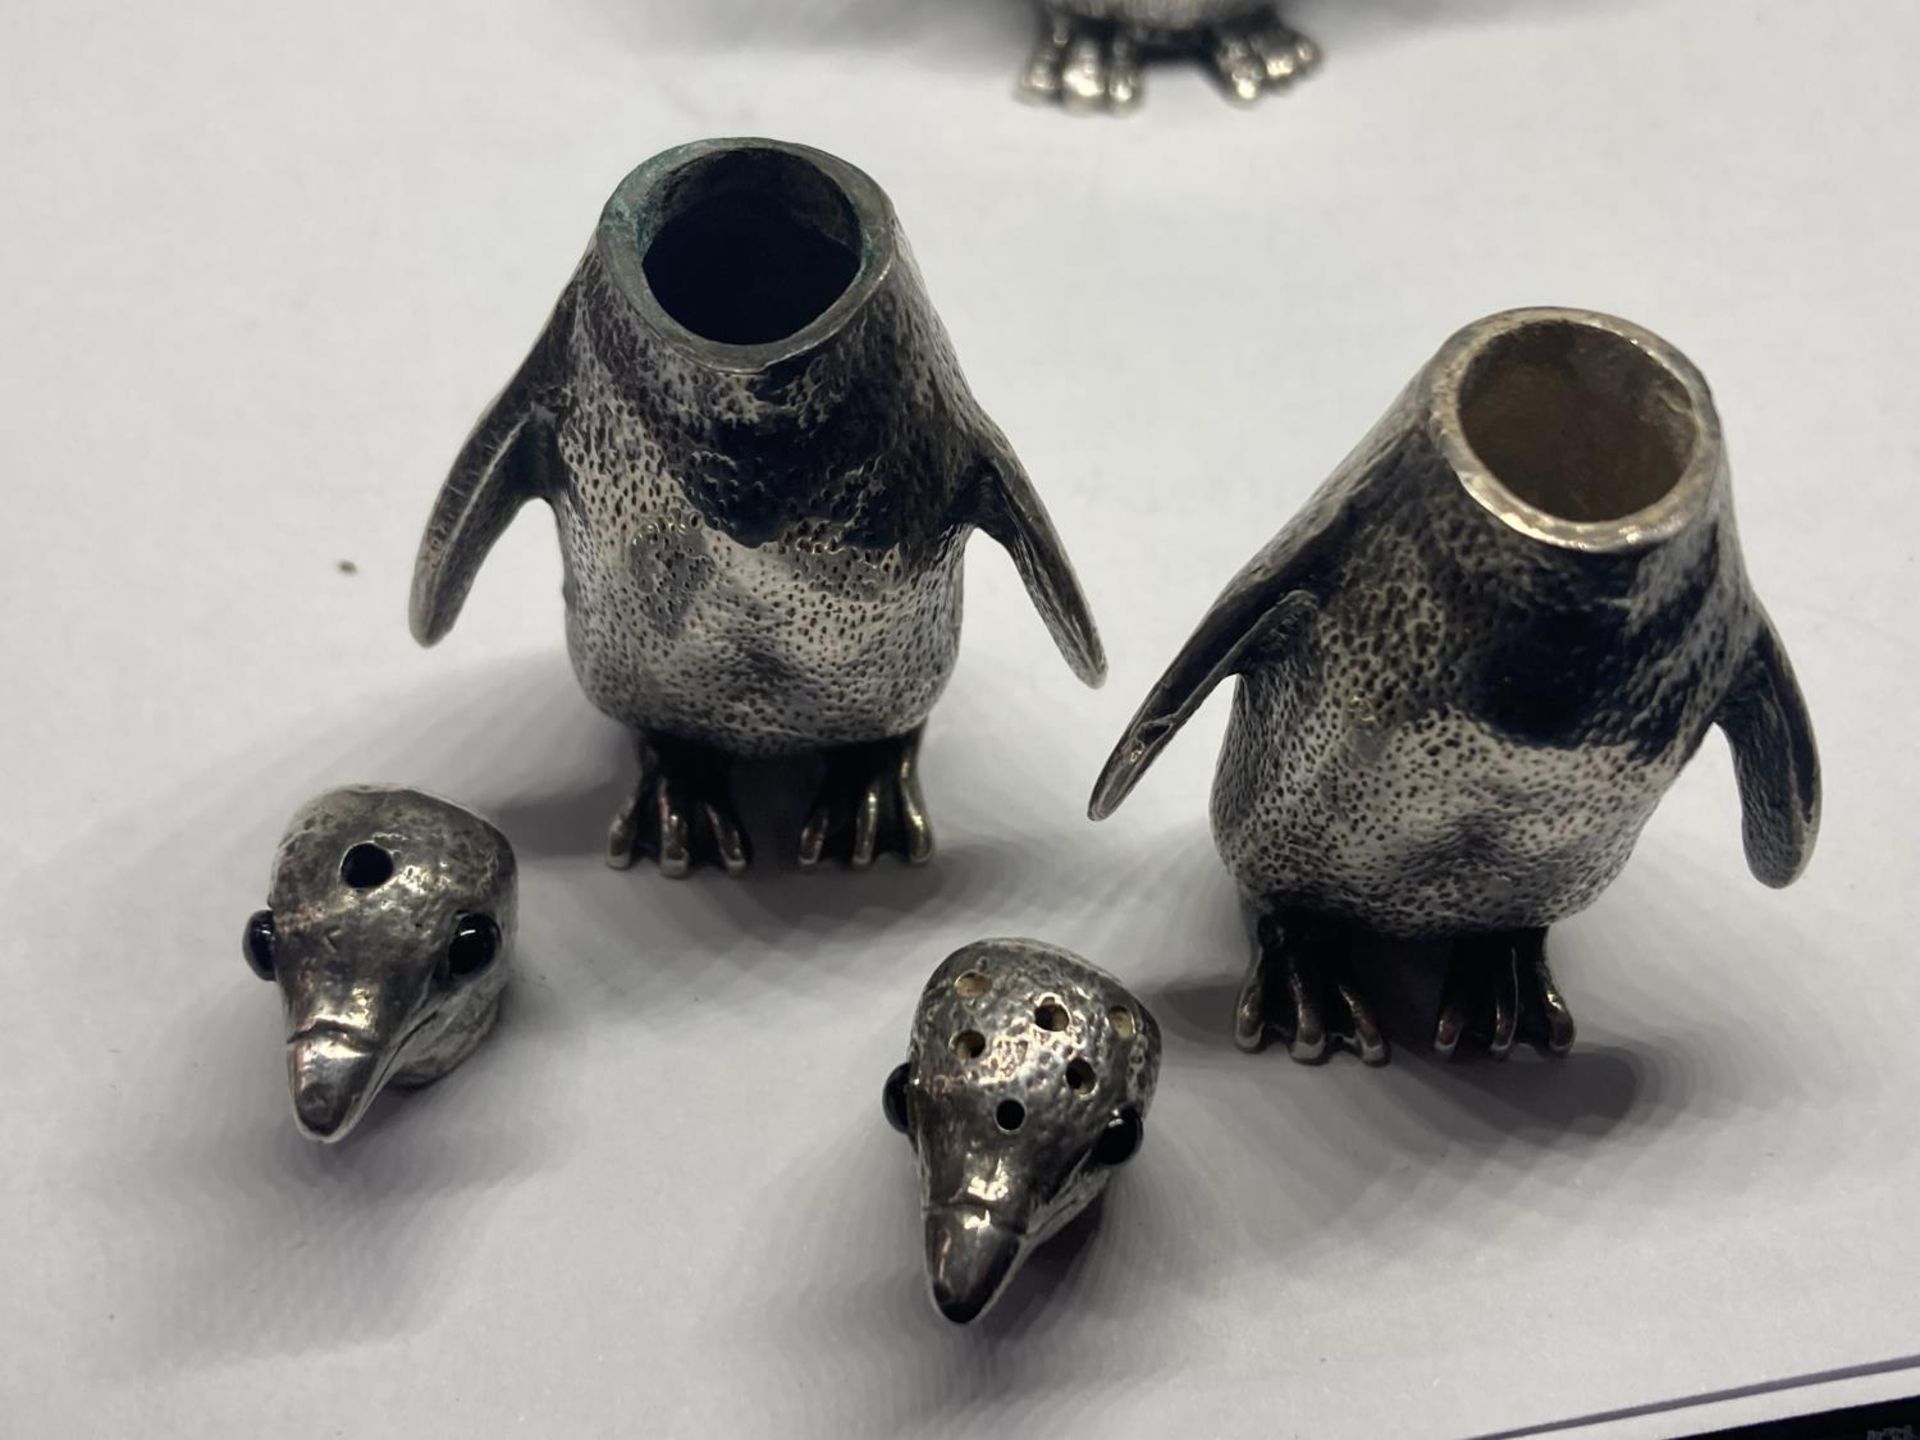 A HALLMARKED LONDON SILVER CRUET SET IN THE FORM OF THREE PENGUINS GROSS WEIGHT 279.3 GRAMS - Image 2 of 11